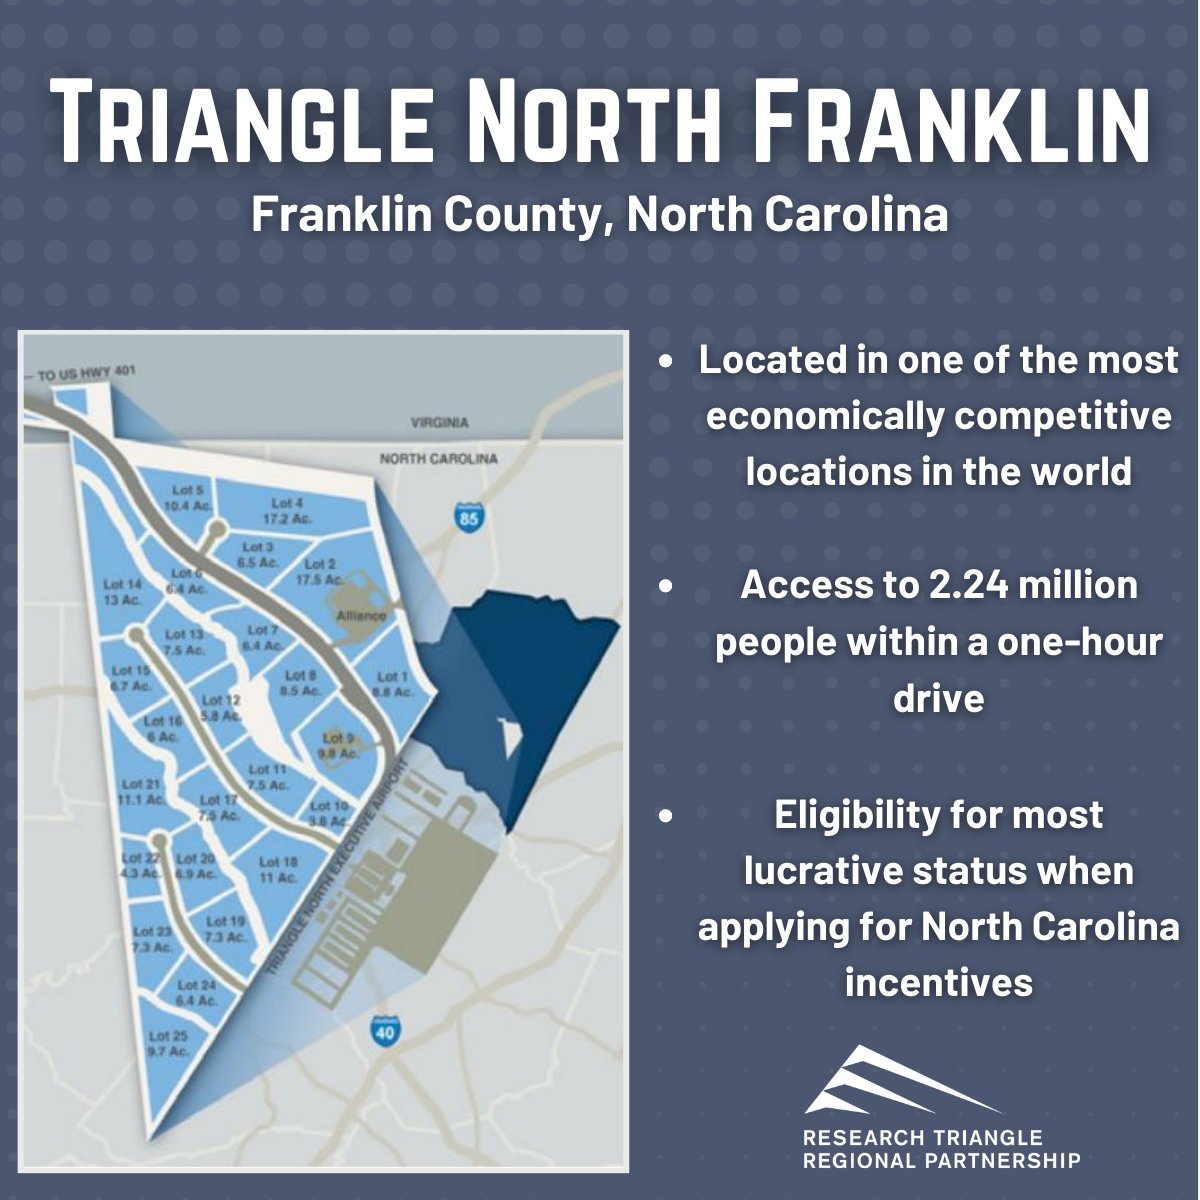 .@FranklinCoNC’s Triangle North Franklin is located in one of the most economically competitive locations in the world offering the perfect combination for success. Read more > bit.ly/FranklinCoNC